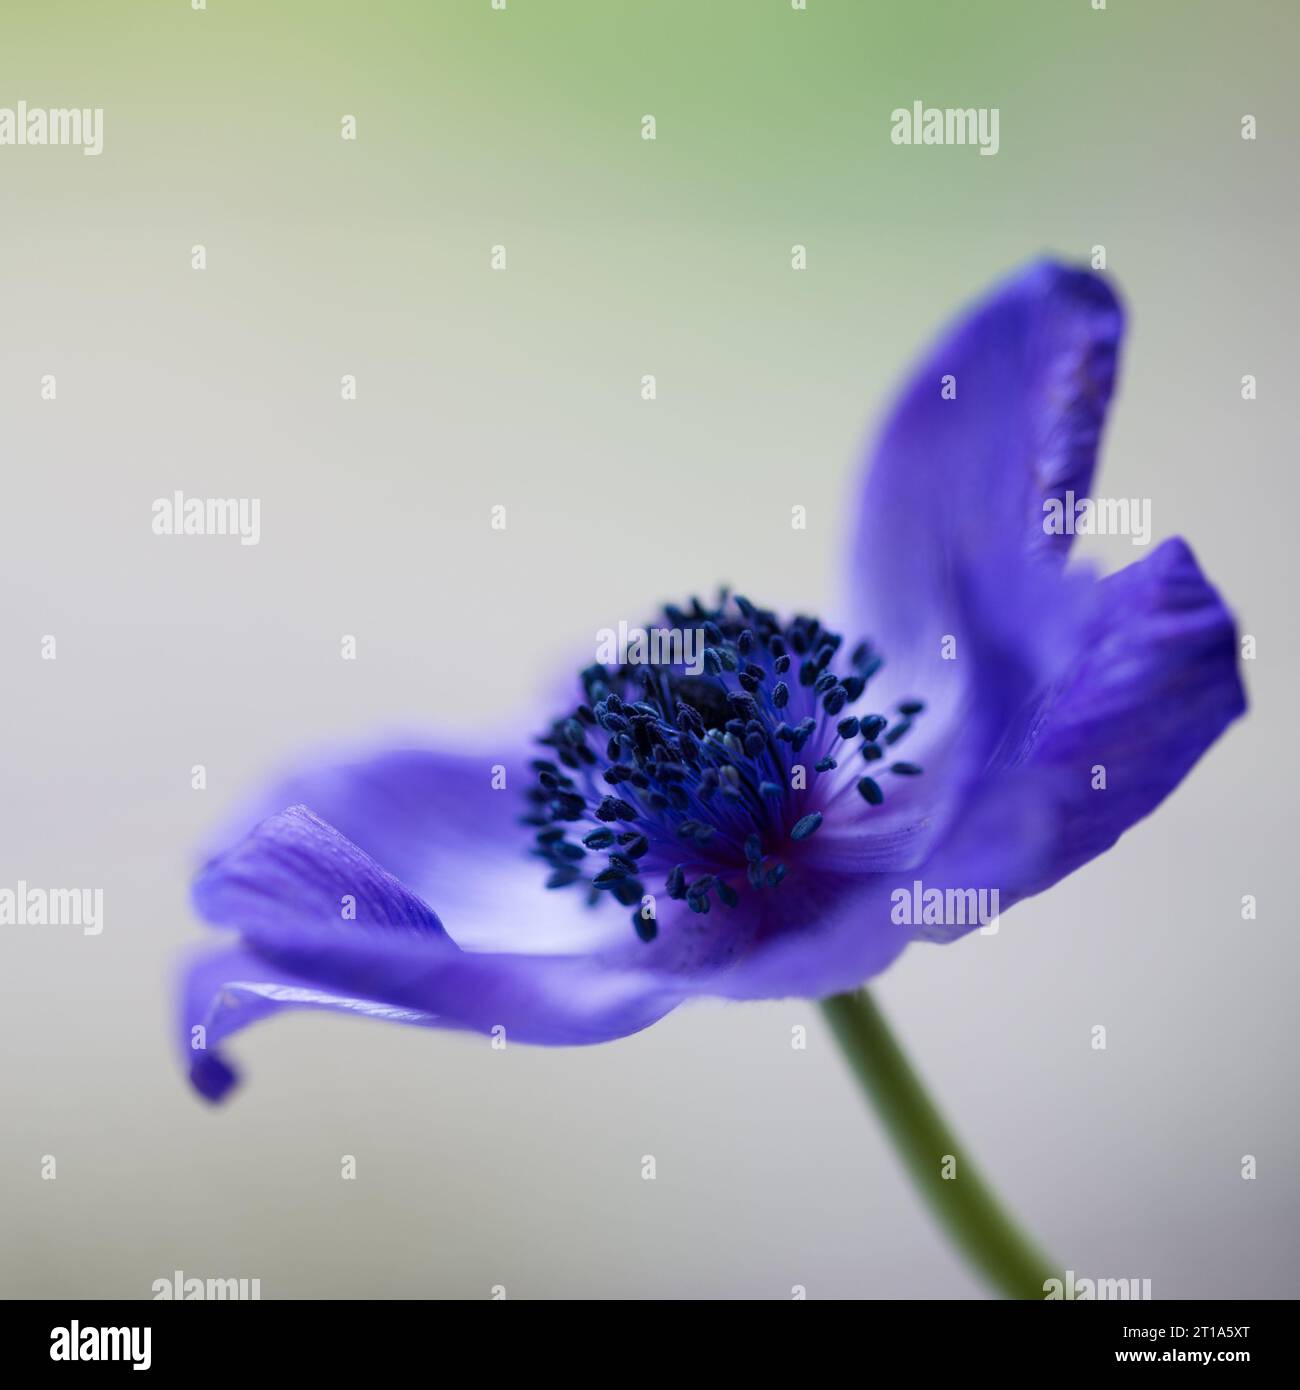 Beautiful colour photograph of a purple anemone  with petals fully opened. Stock Photo